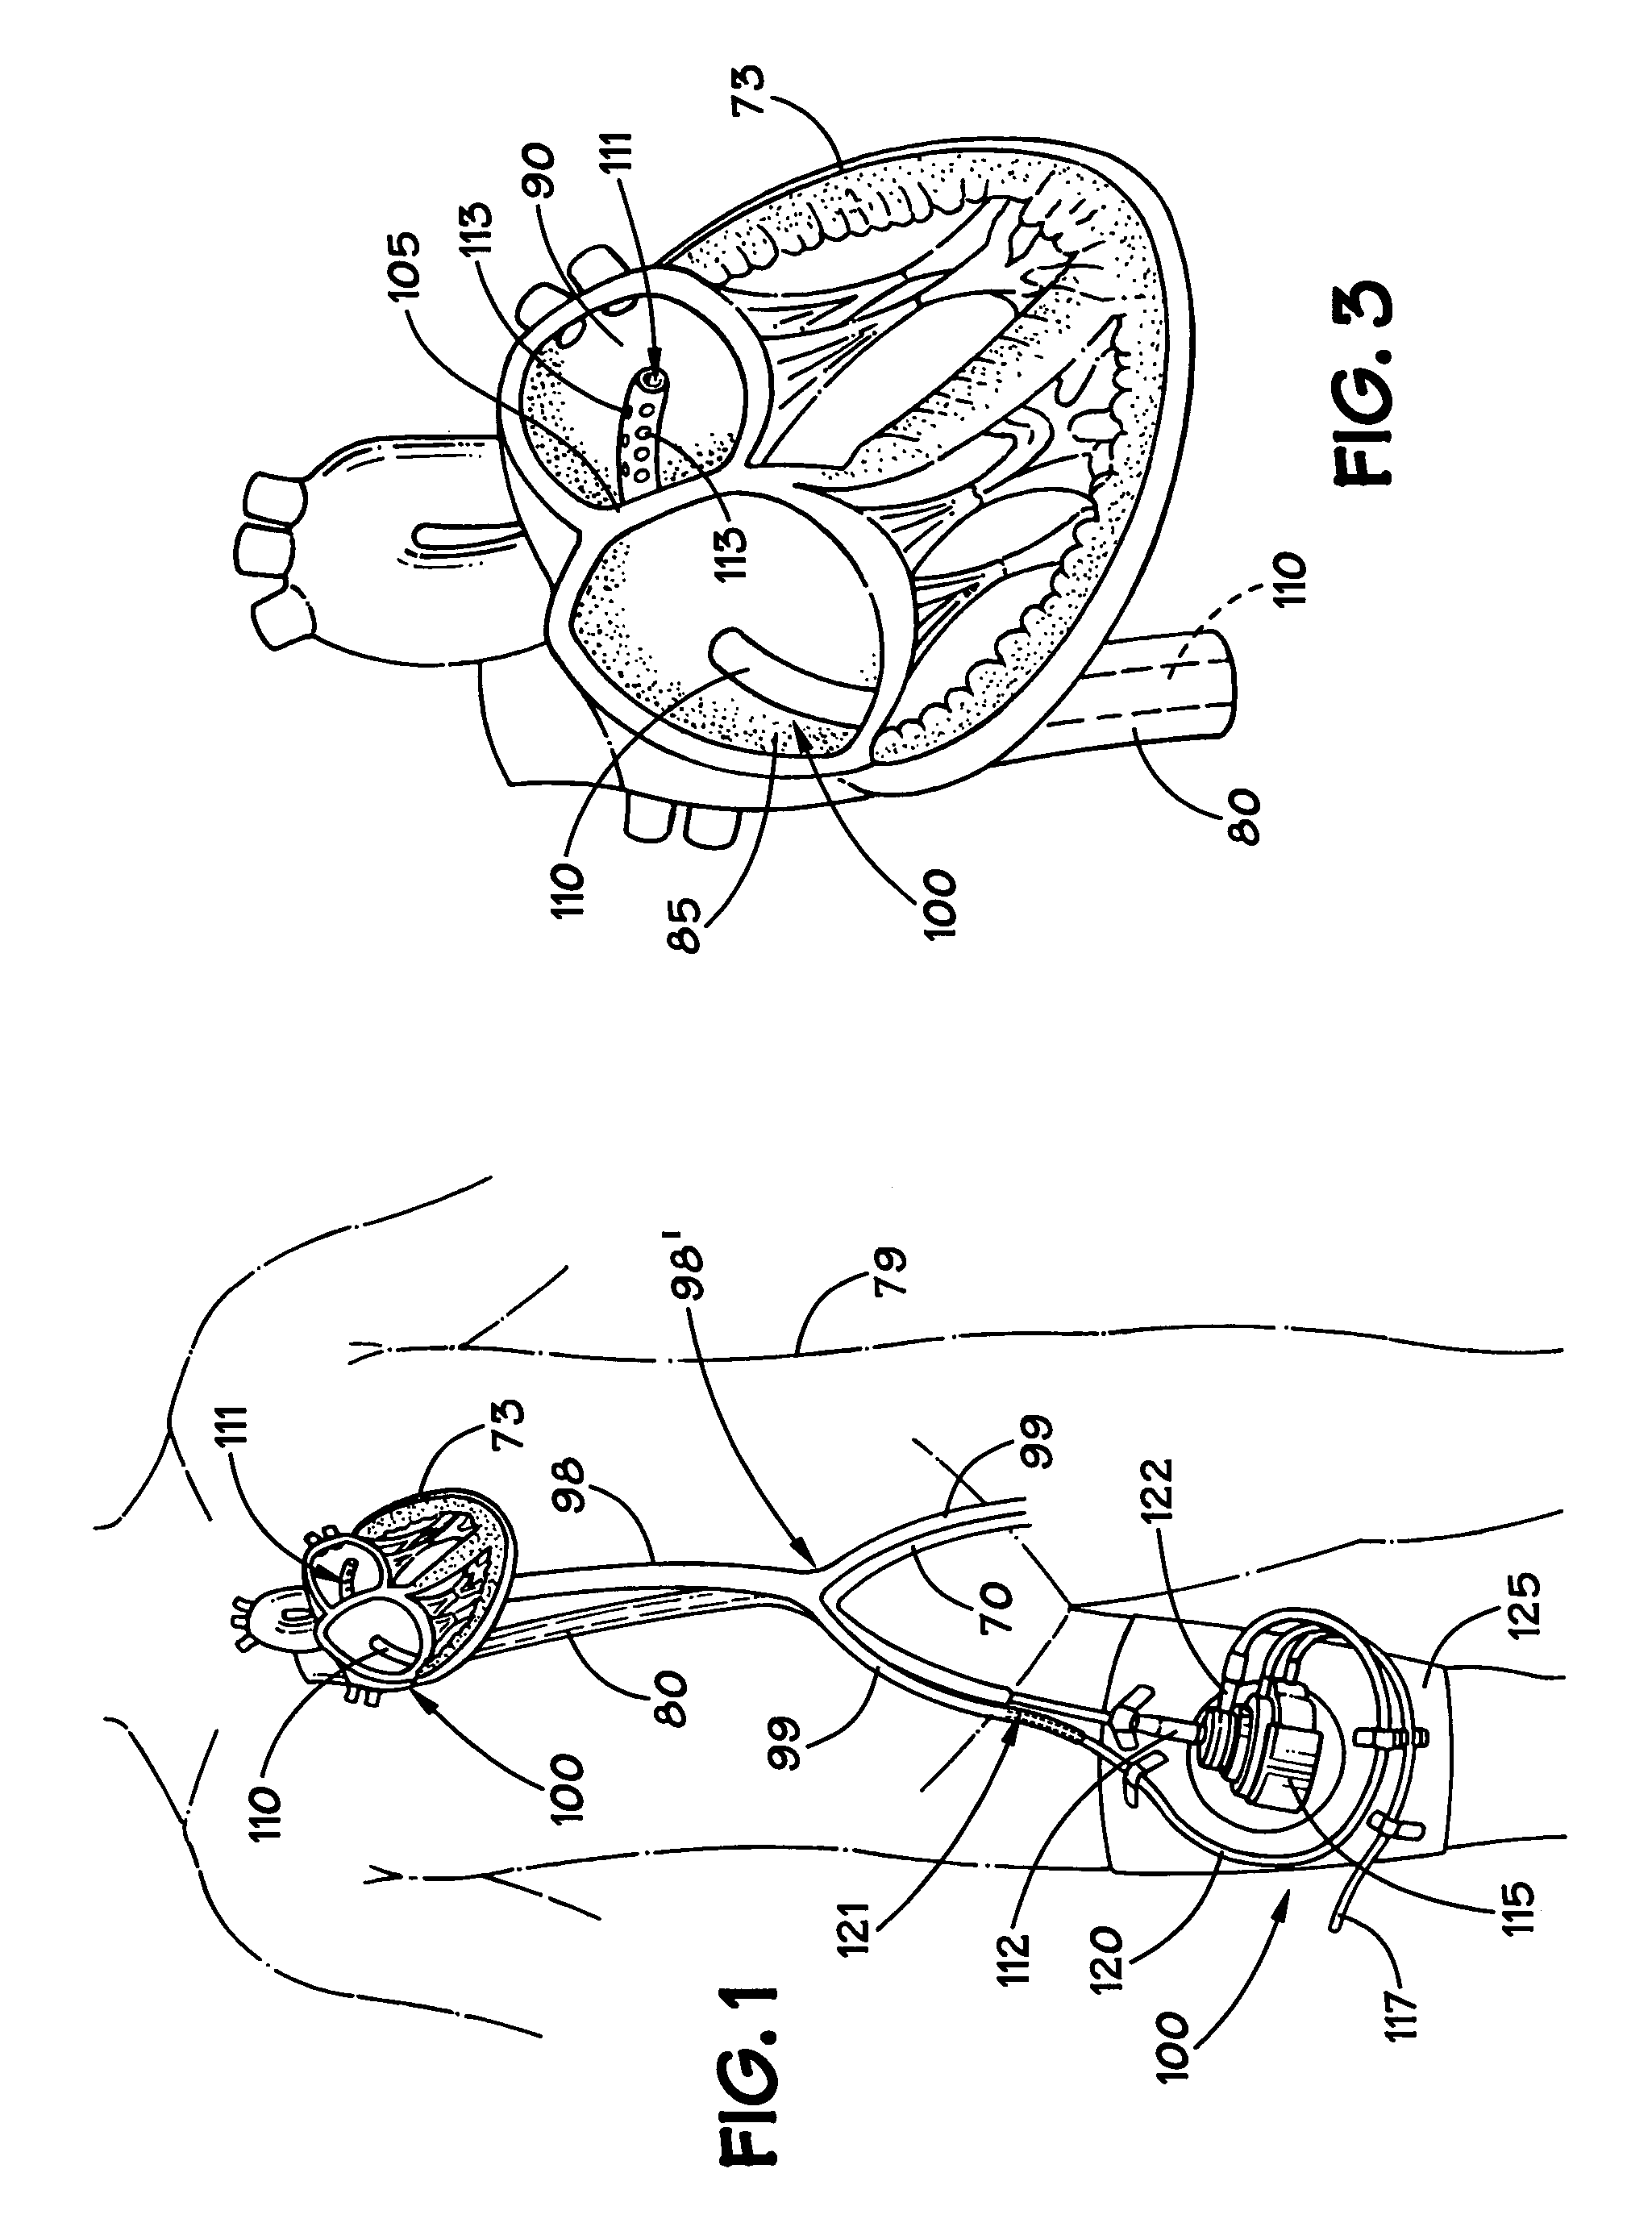 Method and apparatus for implanting an aortic valve prosthesis